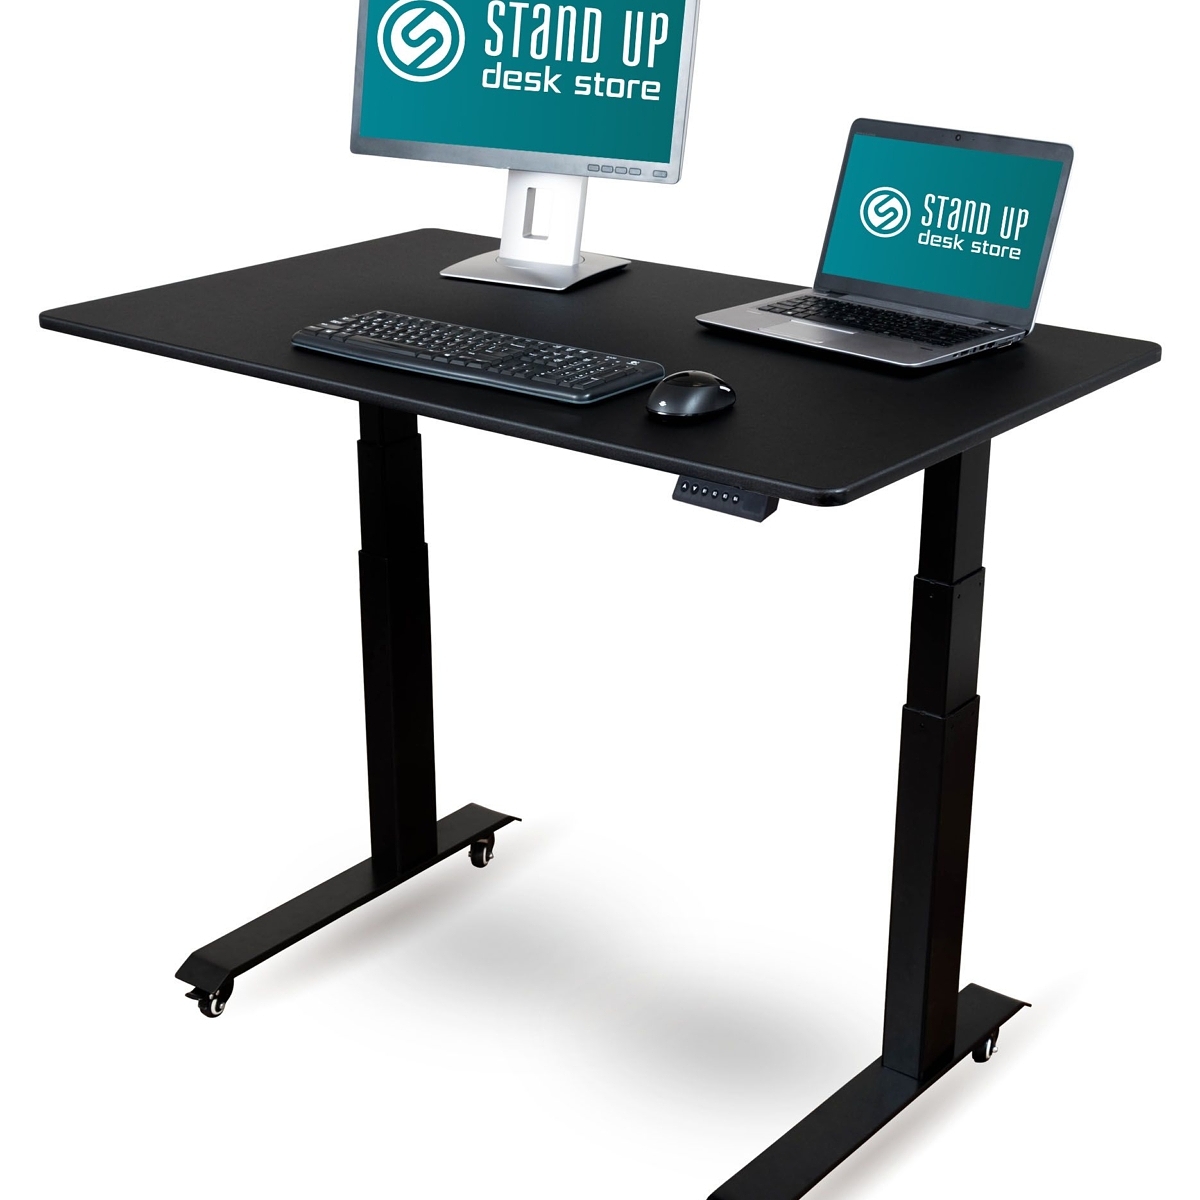 Review: Stir Kinetic smart desk makes you stand up